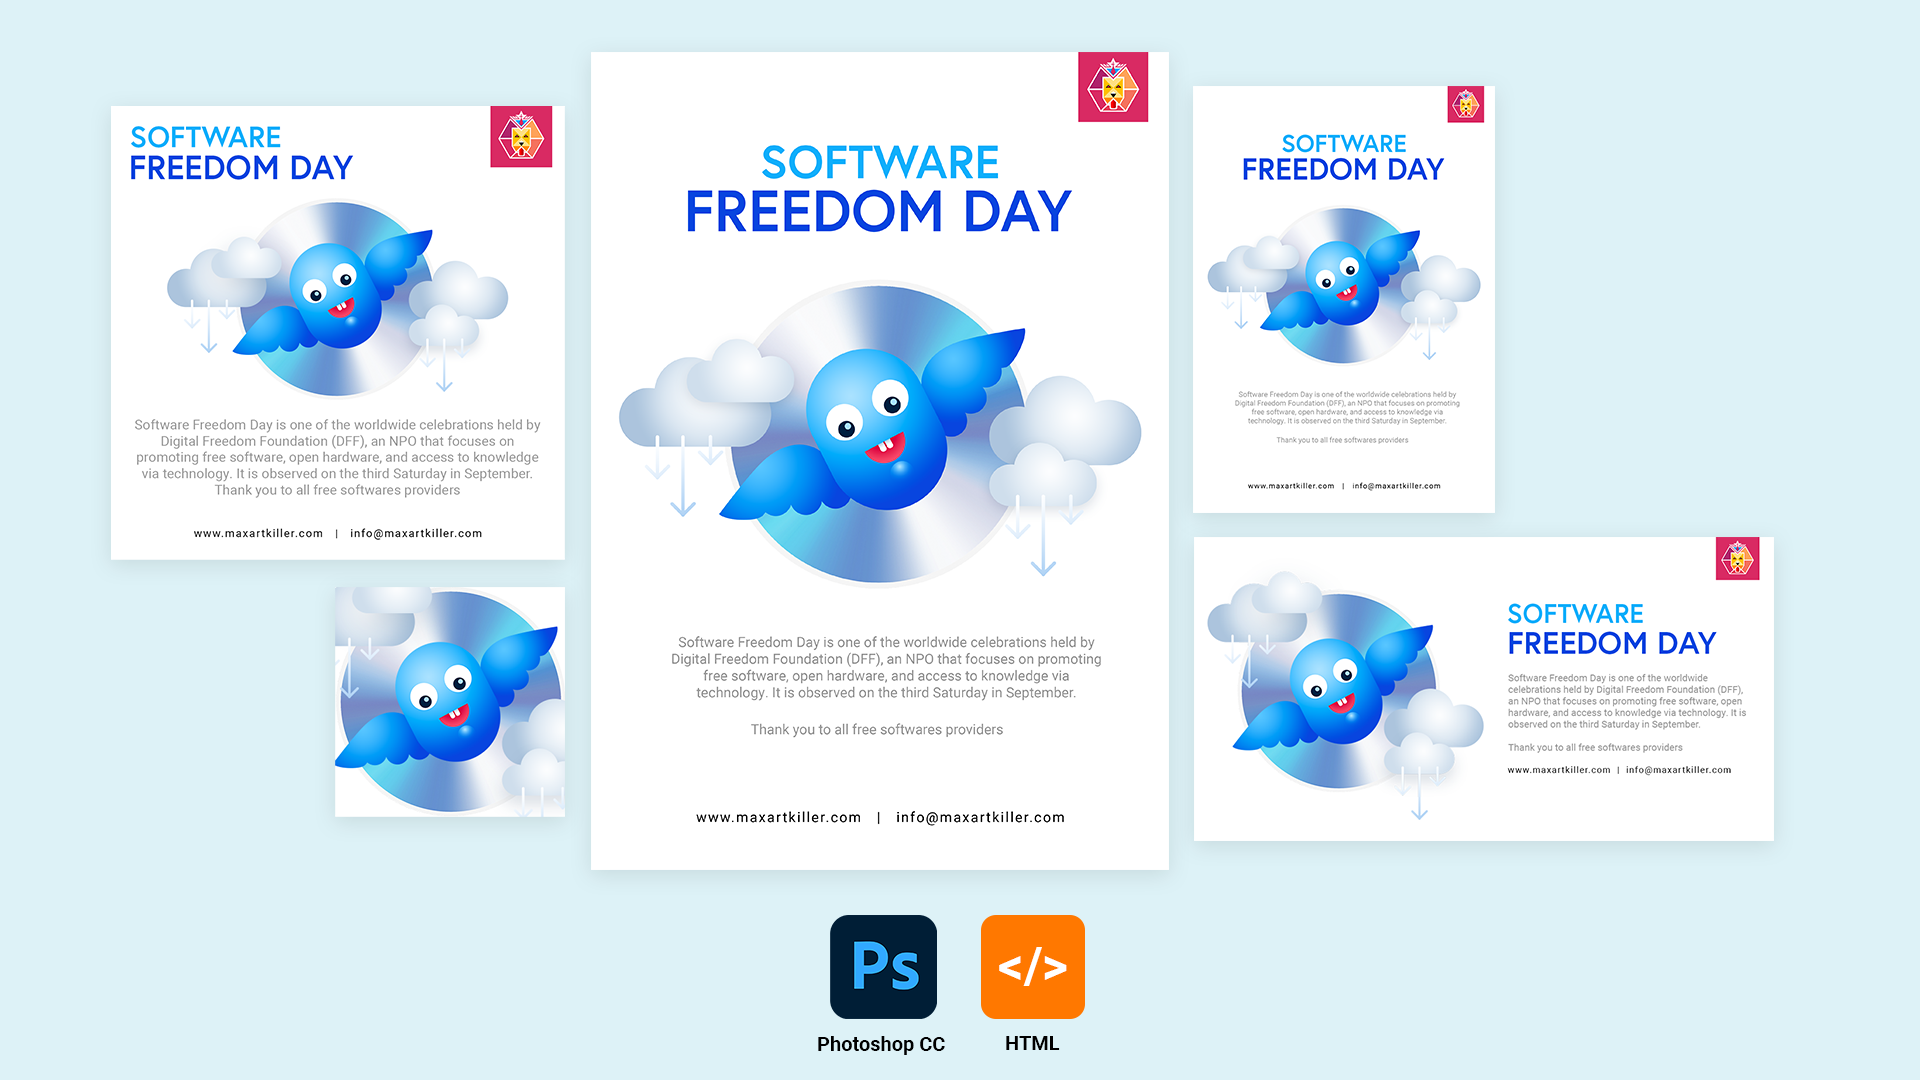 Software Freedom Day (SFD) is an annual worldwide celebration of Free Software organized by the Digital Freedom Foundation (DFF).